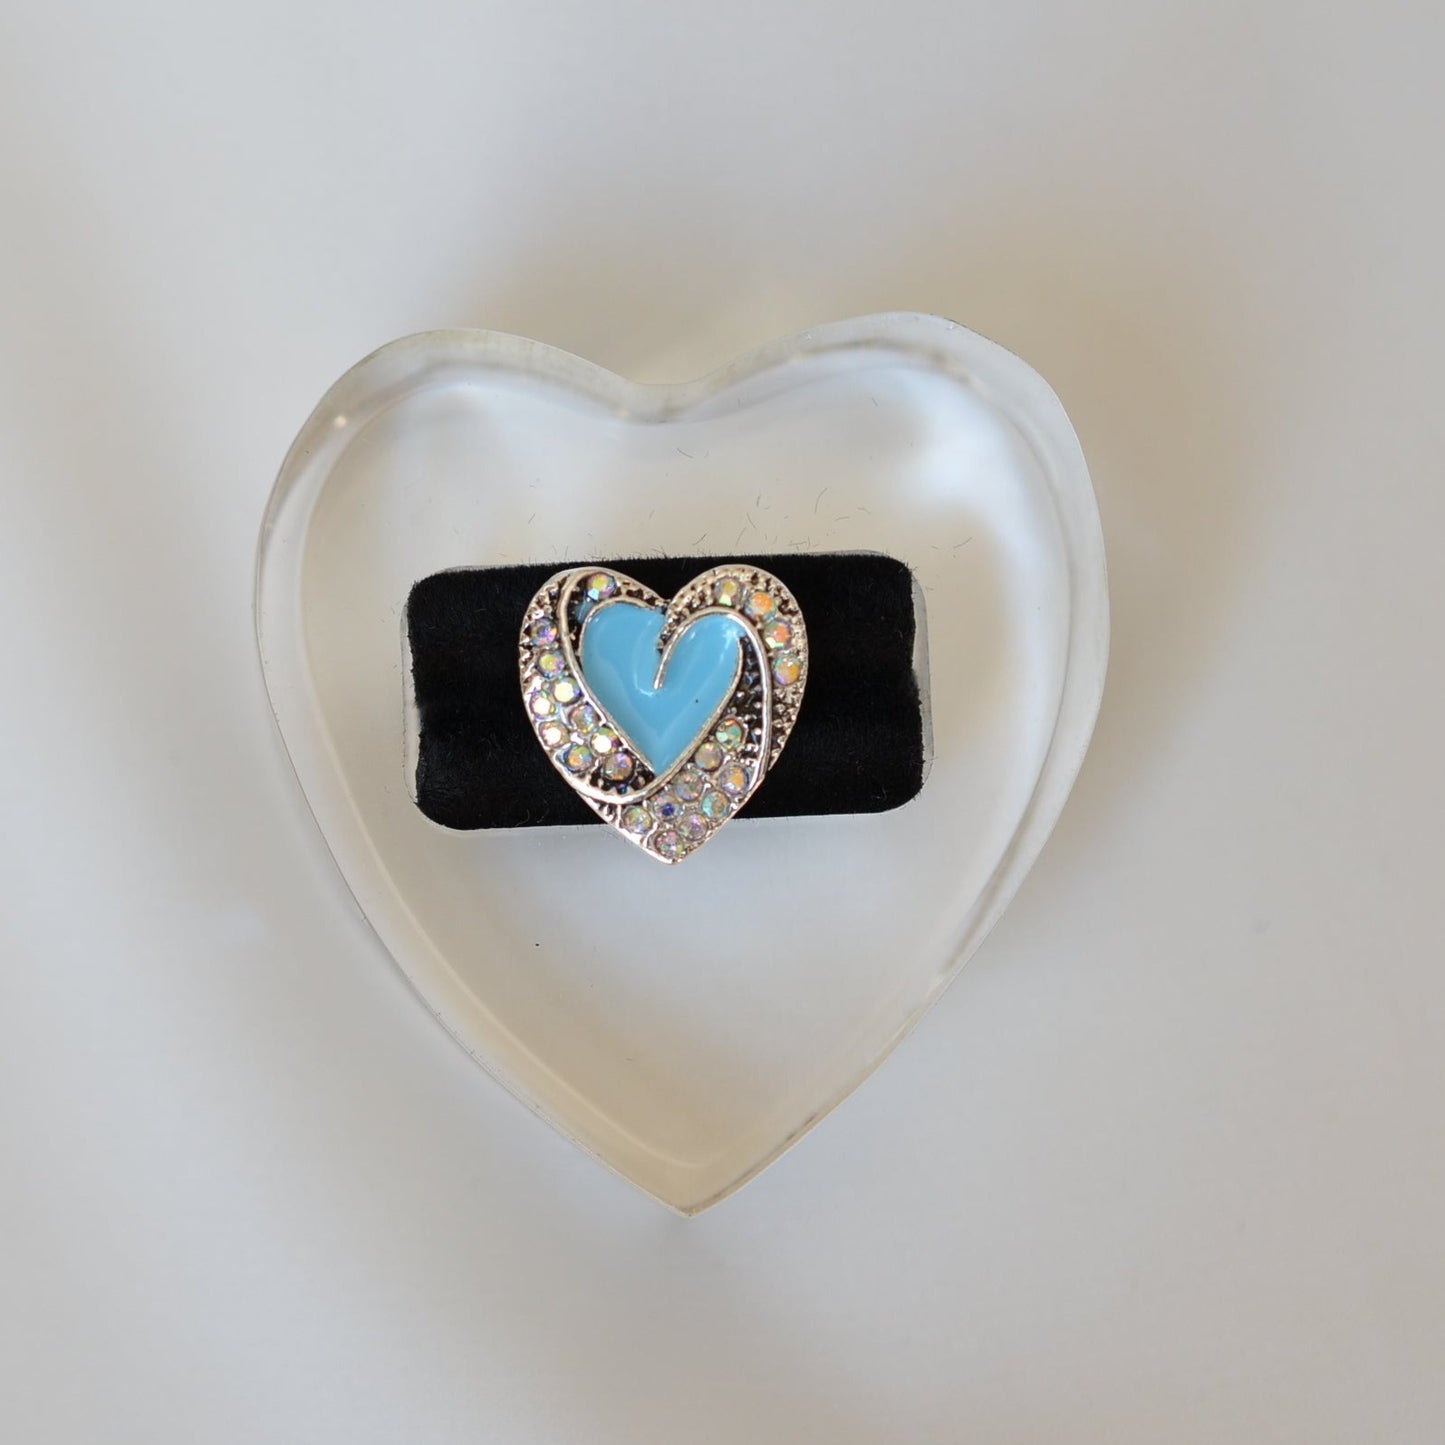 Beautiful Blue Heart with AB Rhinestone Charm for Belts, Bags and Watch Bands